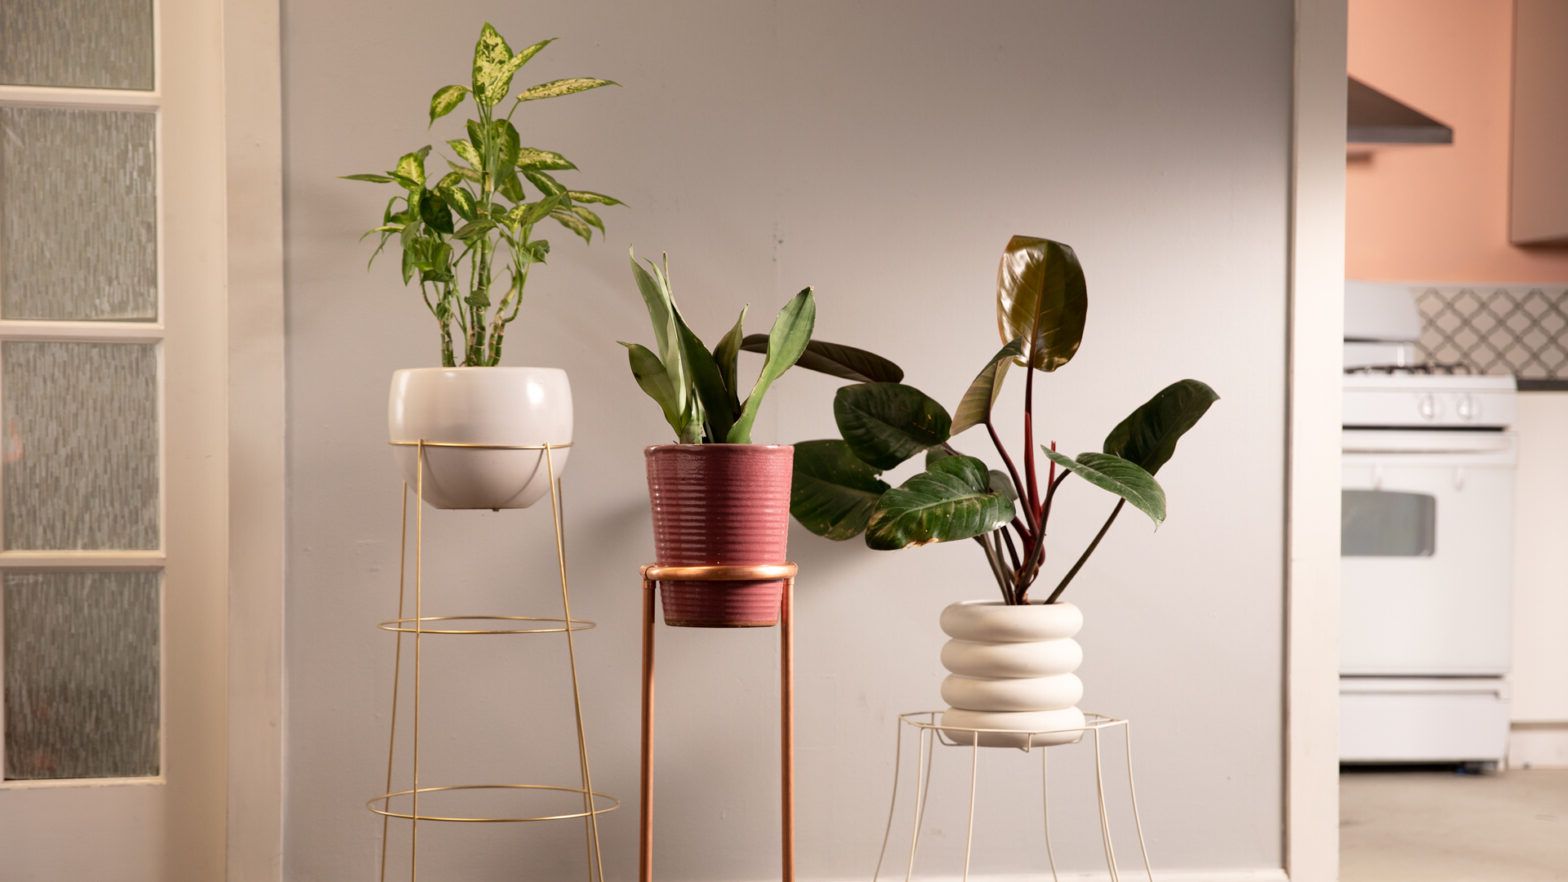 Modern Plant Stands Intended For 2020 Diy Modern Plant Stands 3 Ways In 15 Minutes Or Less (View 13 of 15)